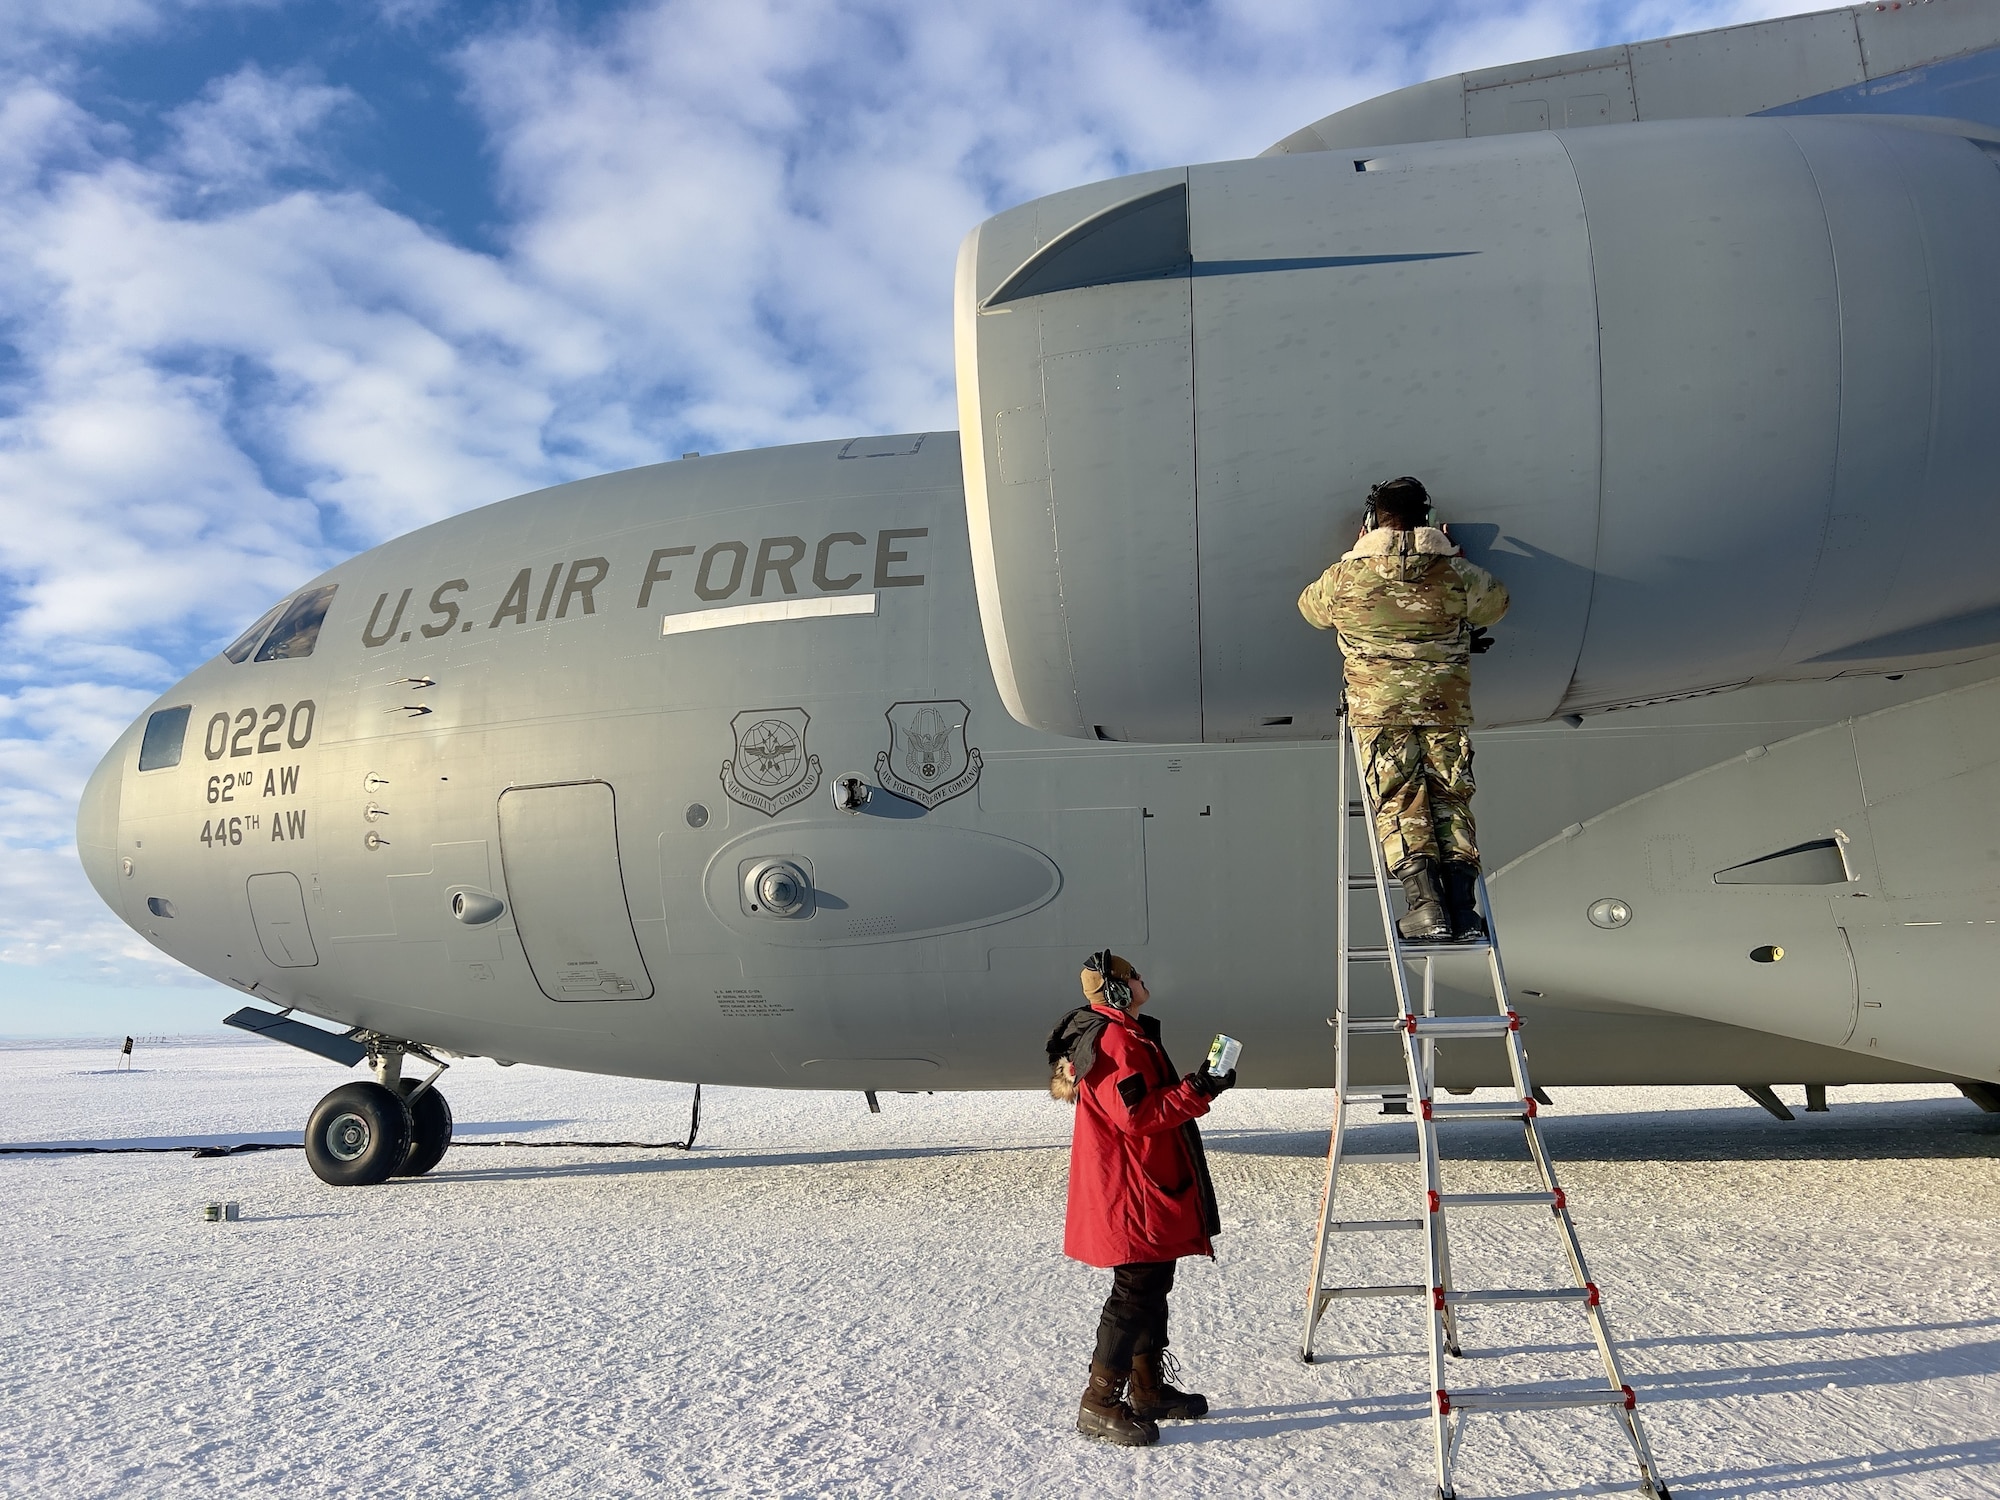 Operation Deep Freeze is crucial in building relationships with partner nations like New Zealand as well as providing Department of Defense logistical support to the National Science Foundation (NSF) for their continued research with the U.S. Antarctic Program.